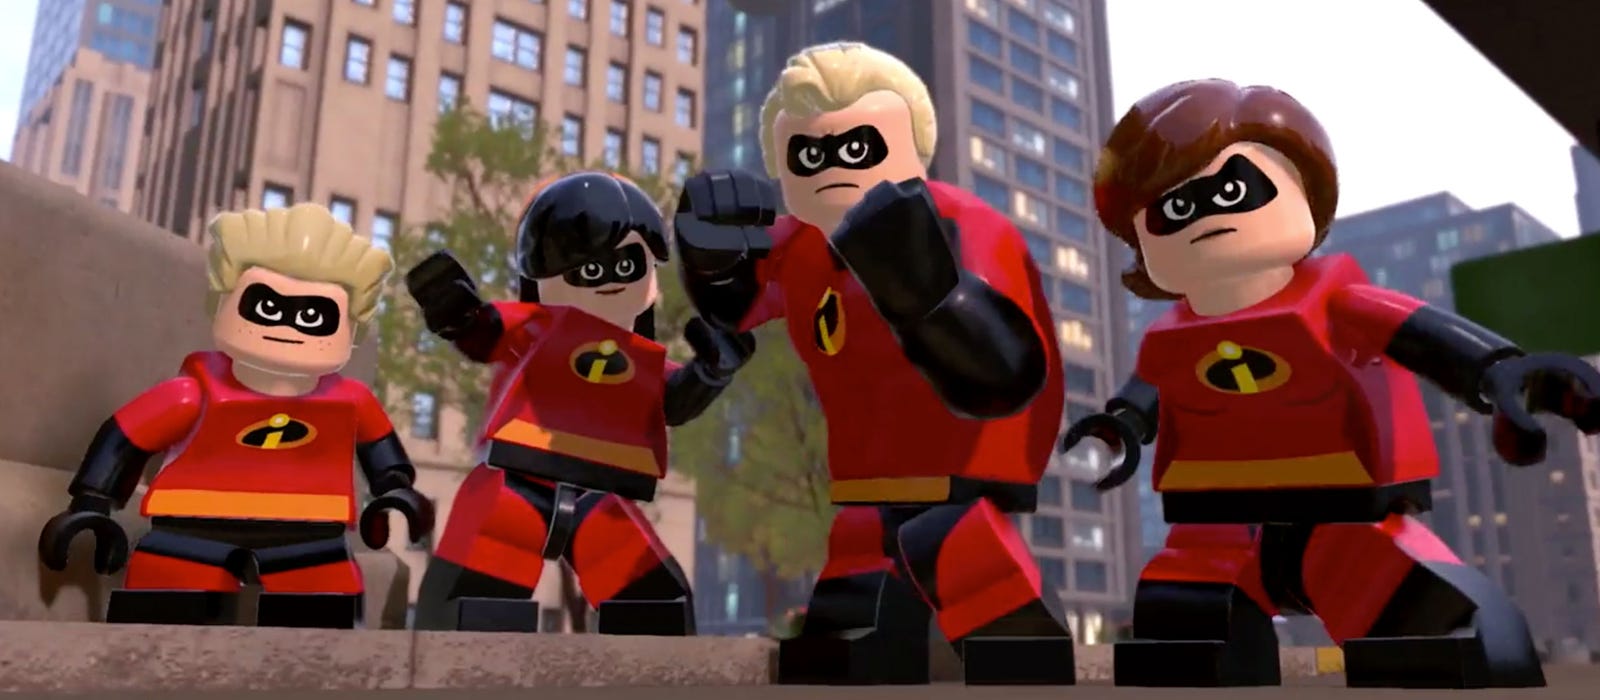 LEGO® The Incredibles | Games | The Incredibles | Official LEGO® Shop US